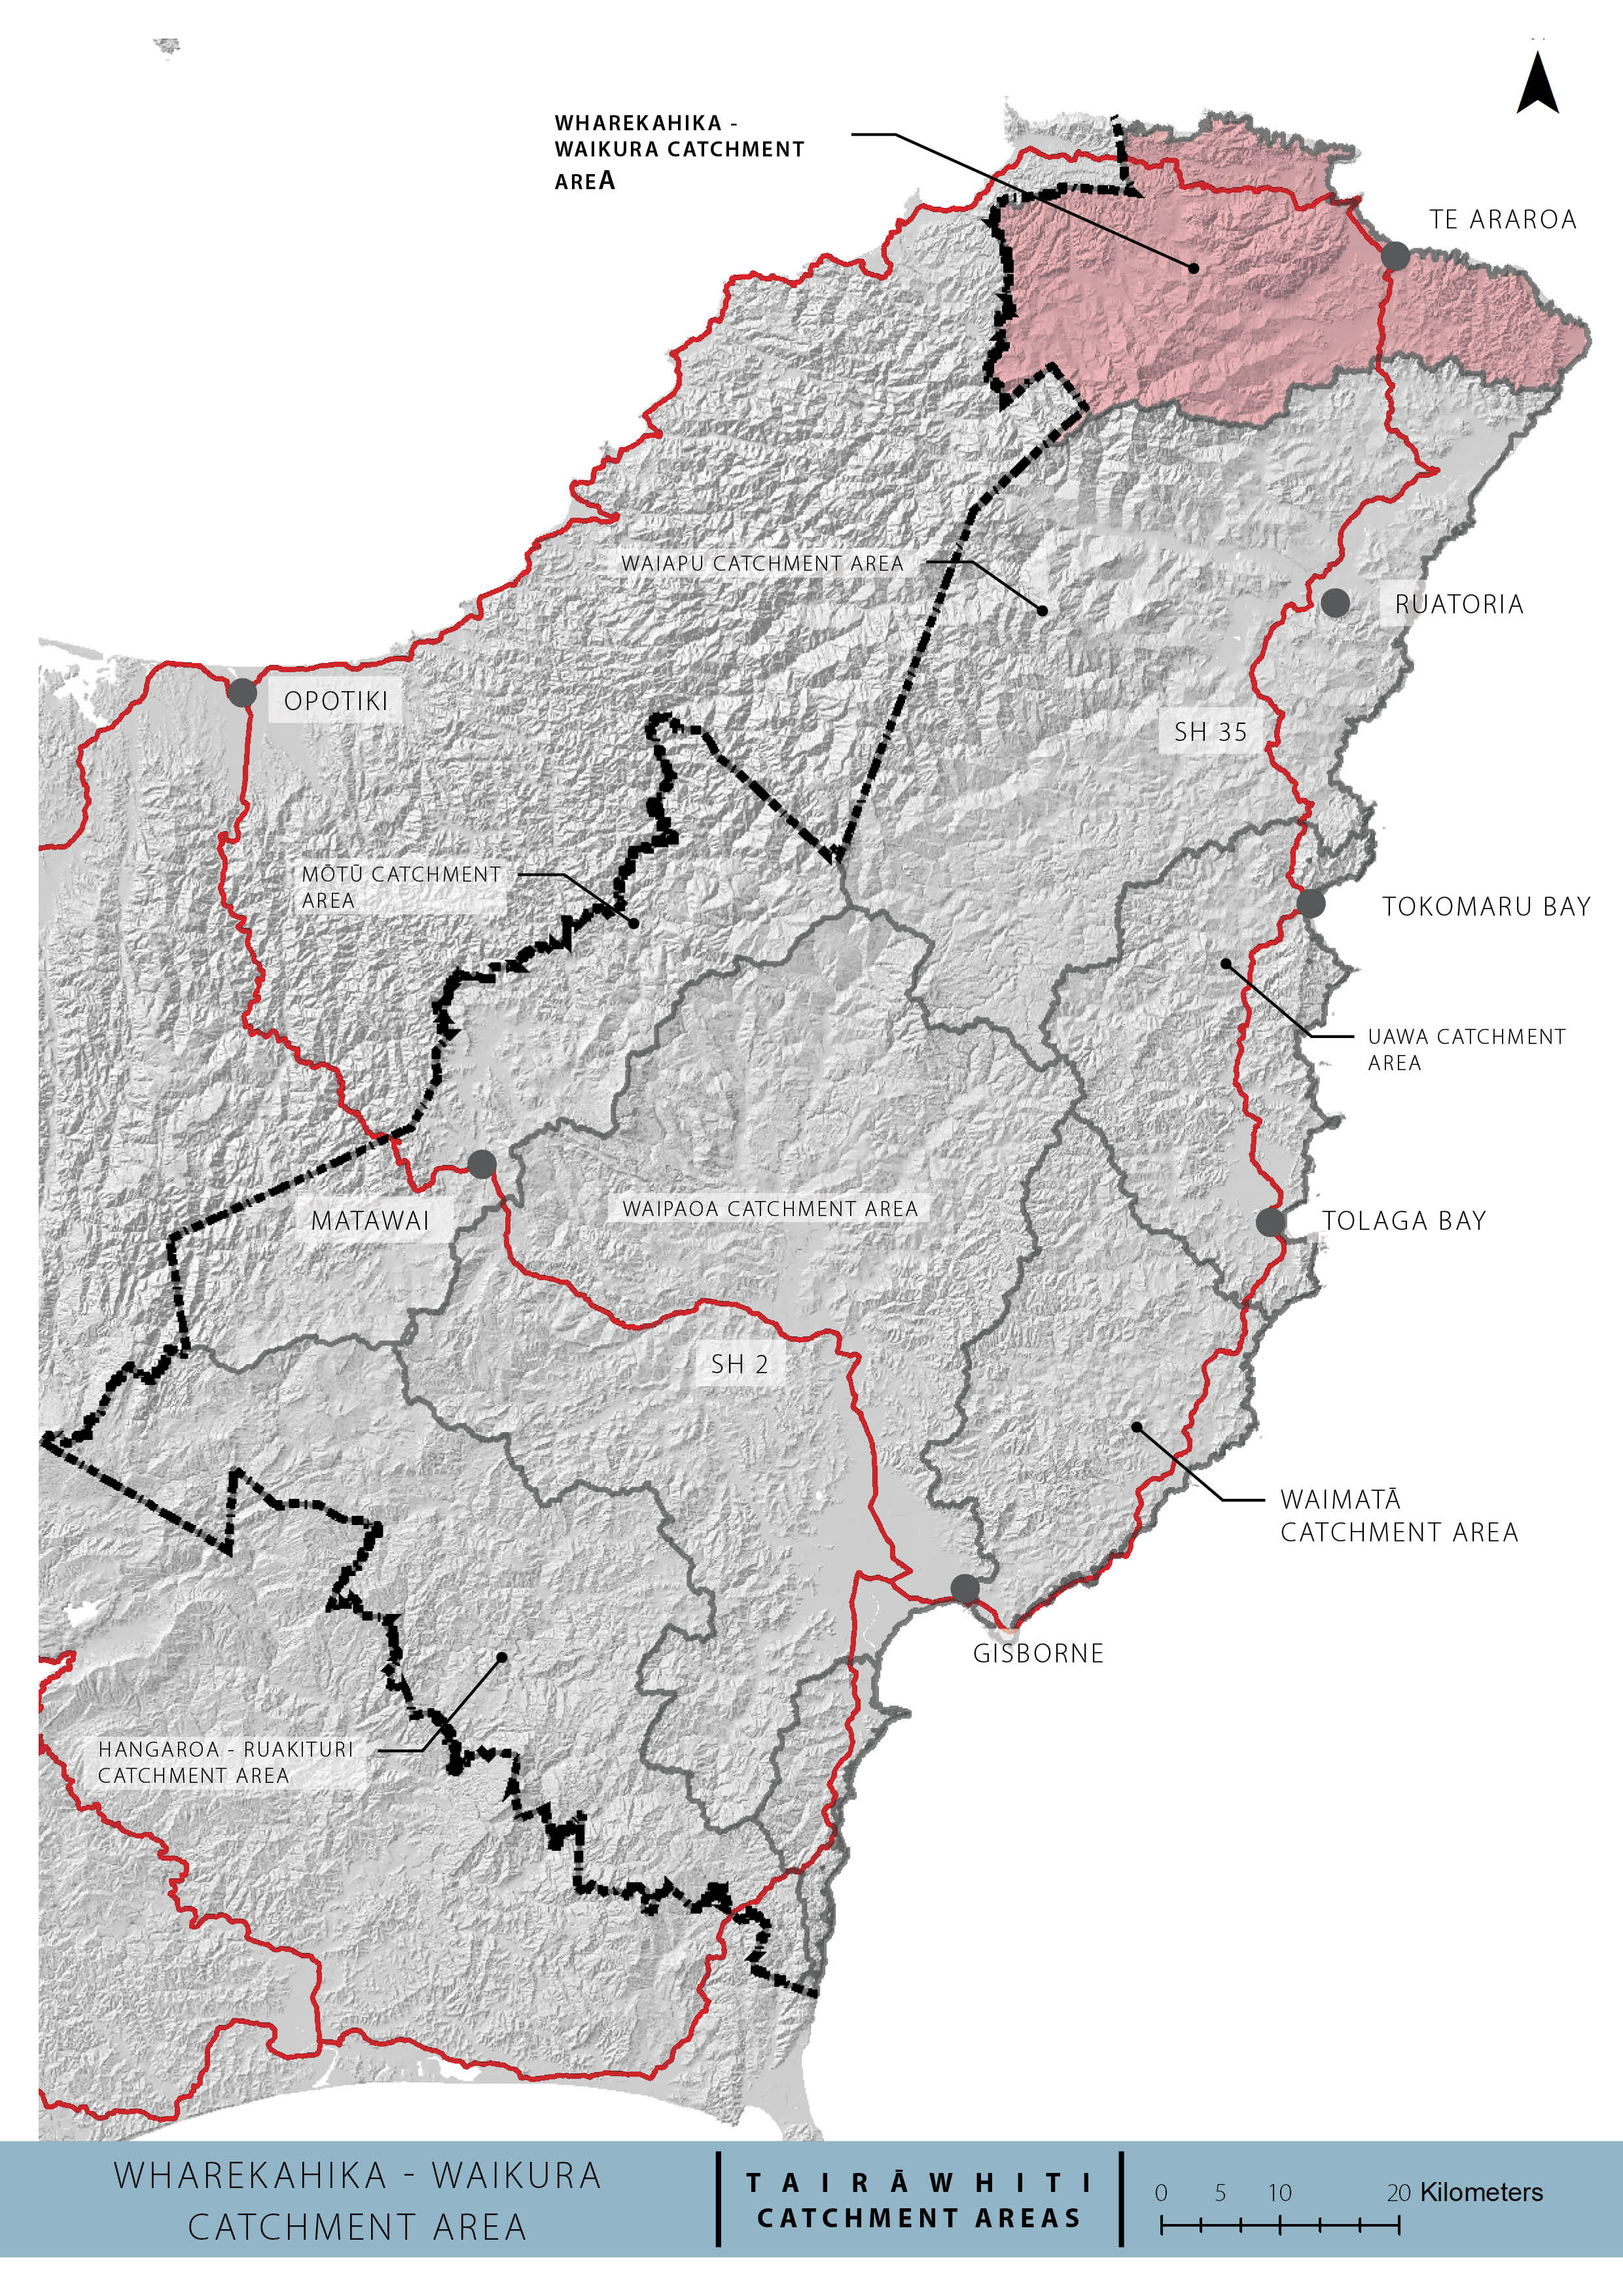 Northern Catchment